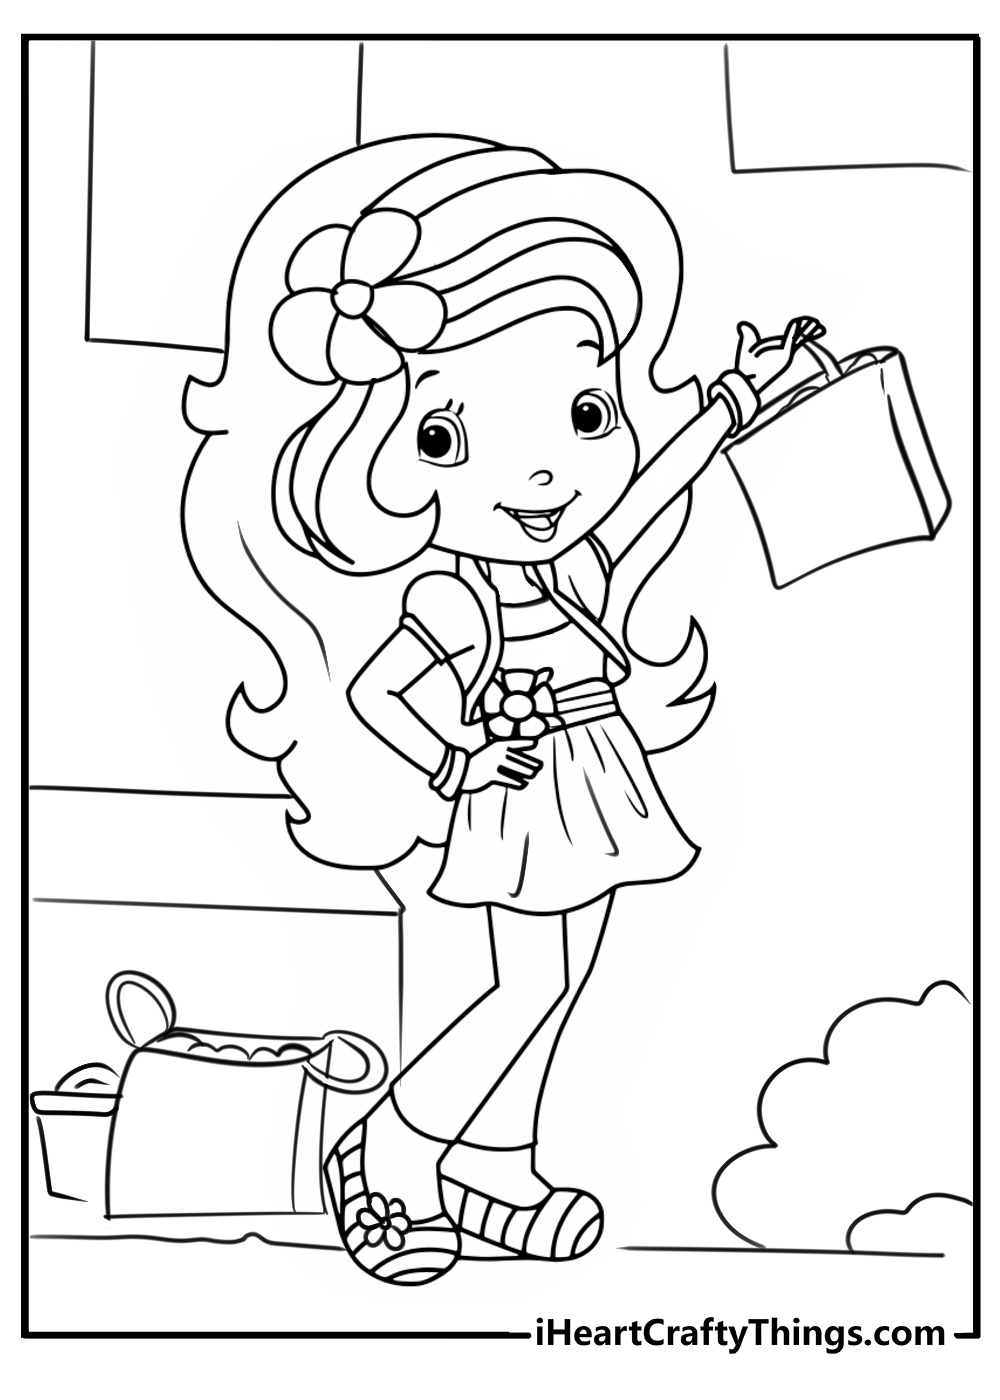 Strawberry shortcake coloring page of orange blossom shopping